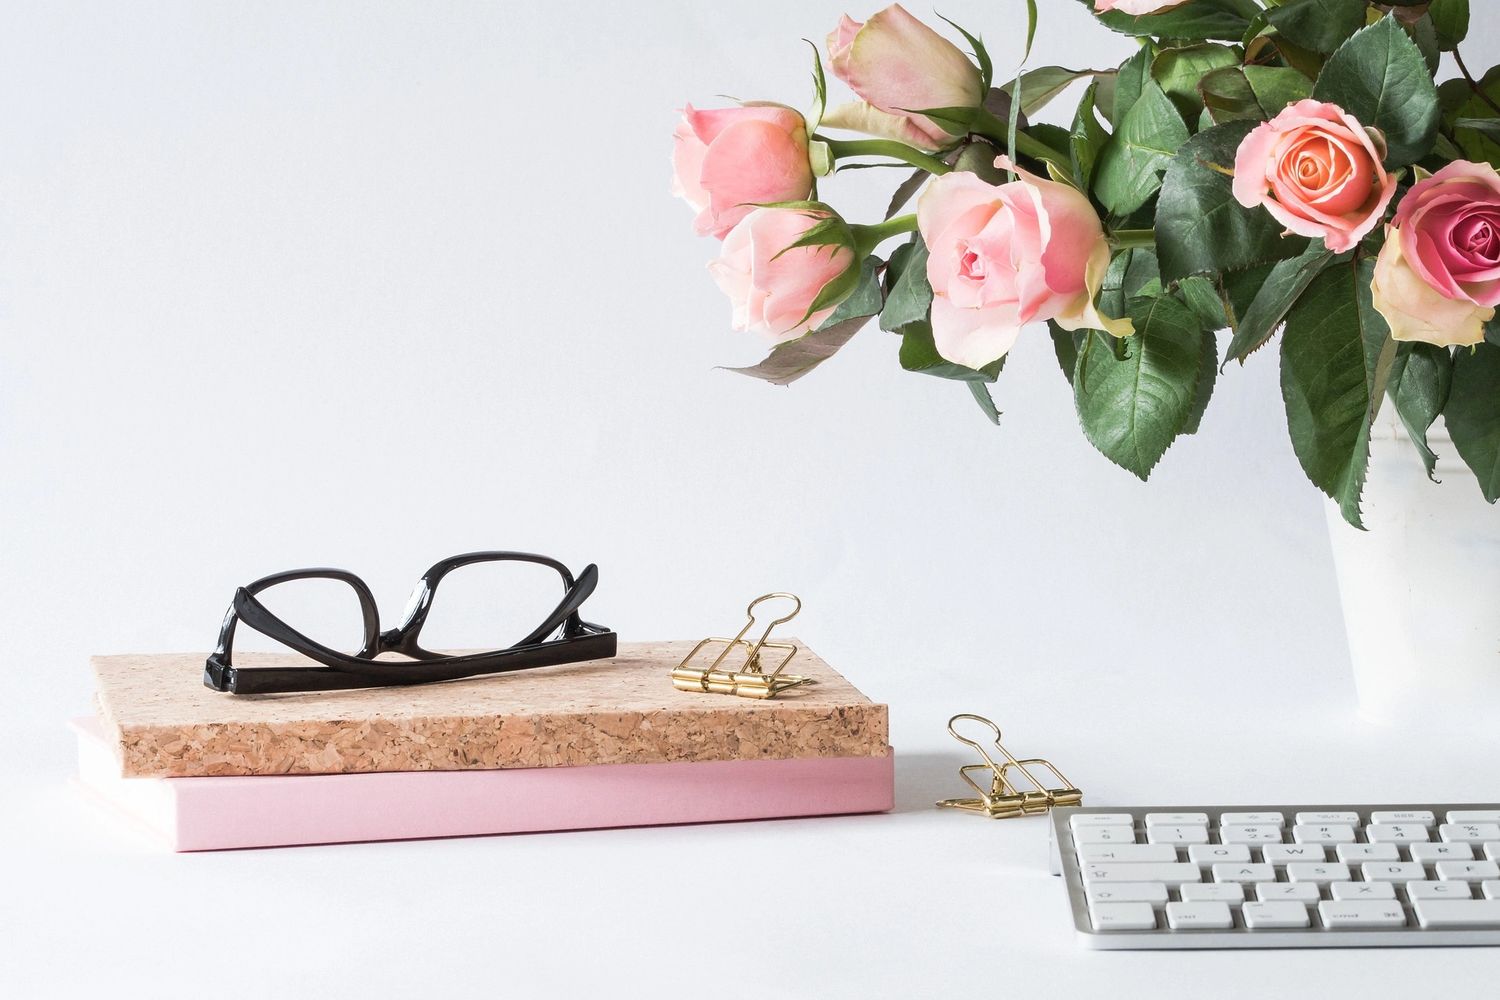 Glasses on a pile of books, next to pink roses in a vase and a keyboard. Bulldog clips.